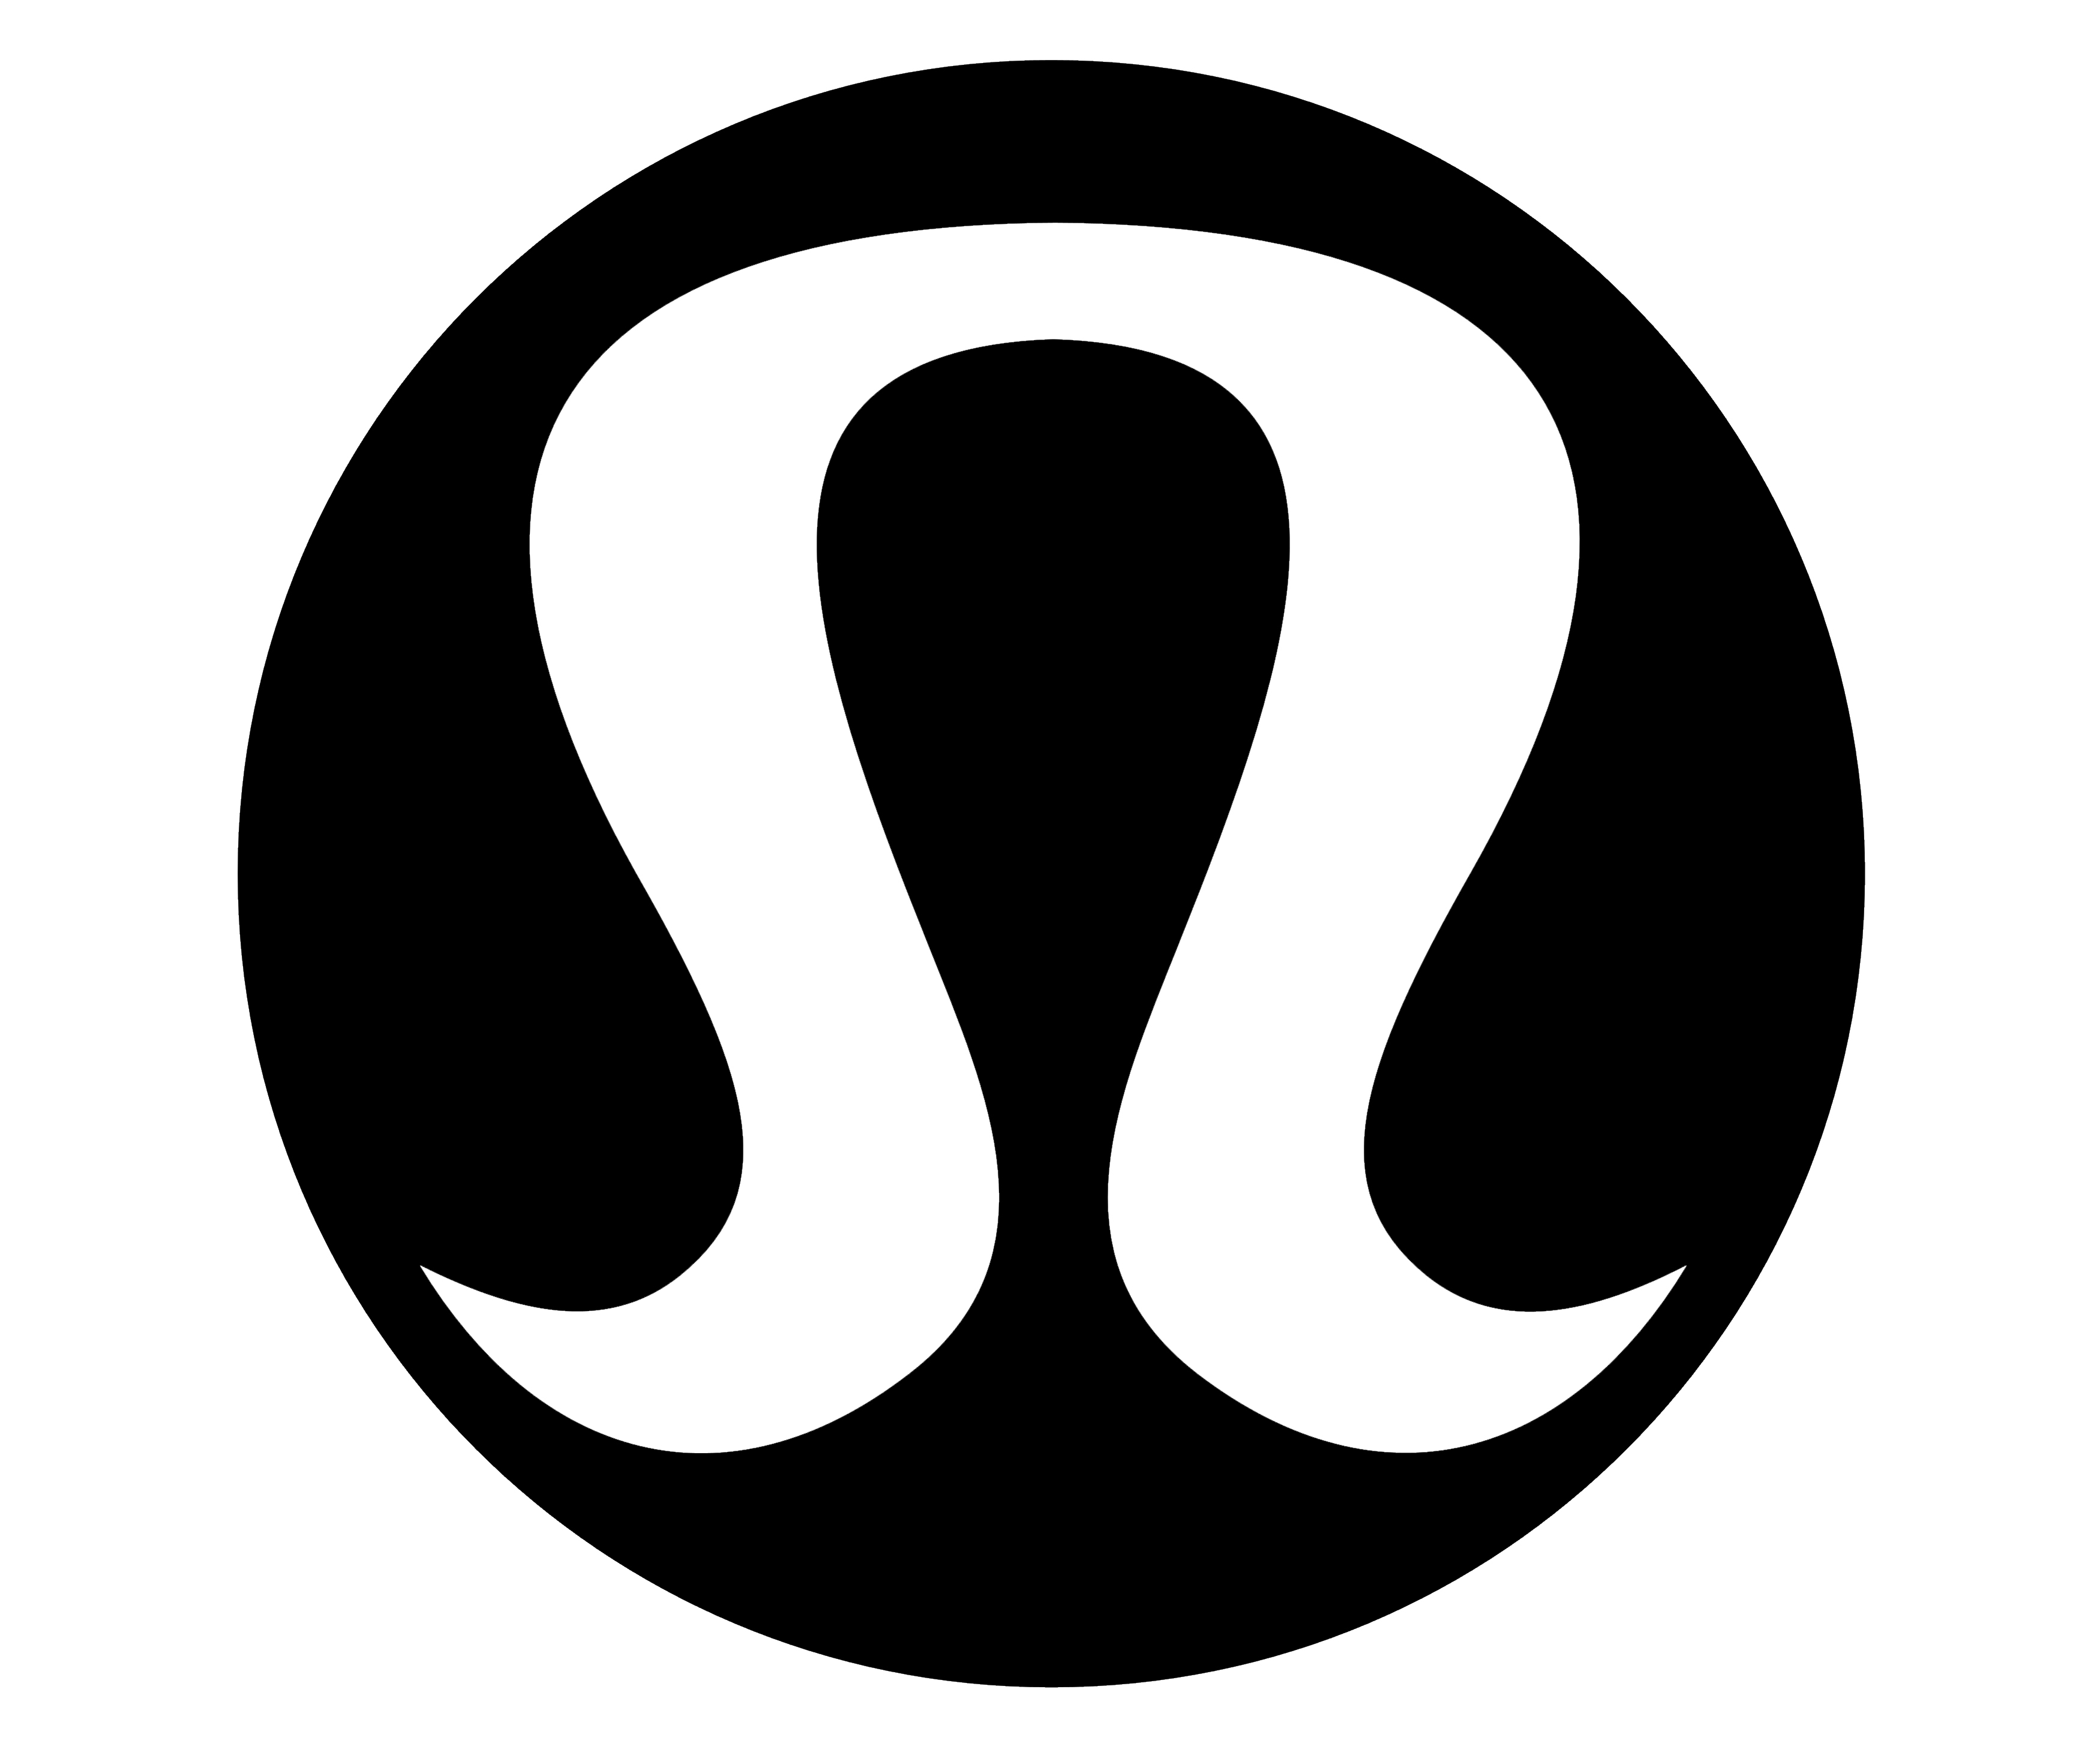 Will Lululemon Successfully Expand to Europe & Asia?